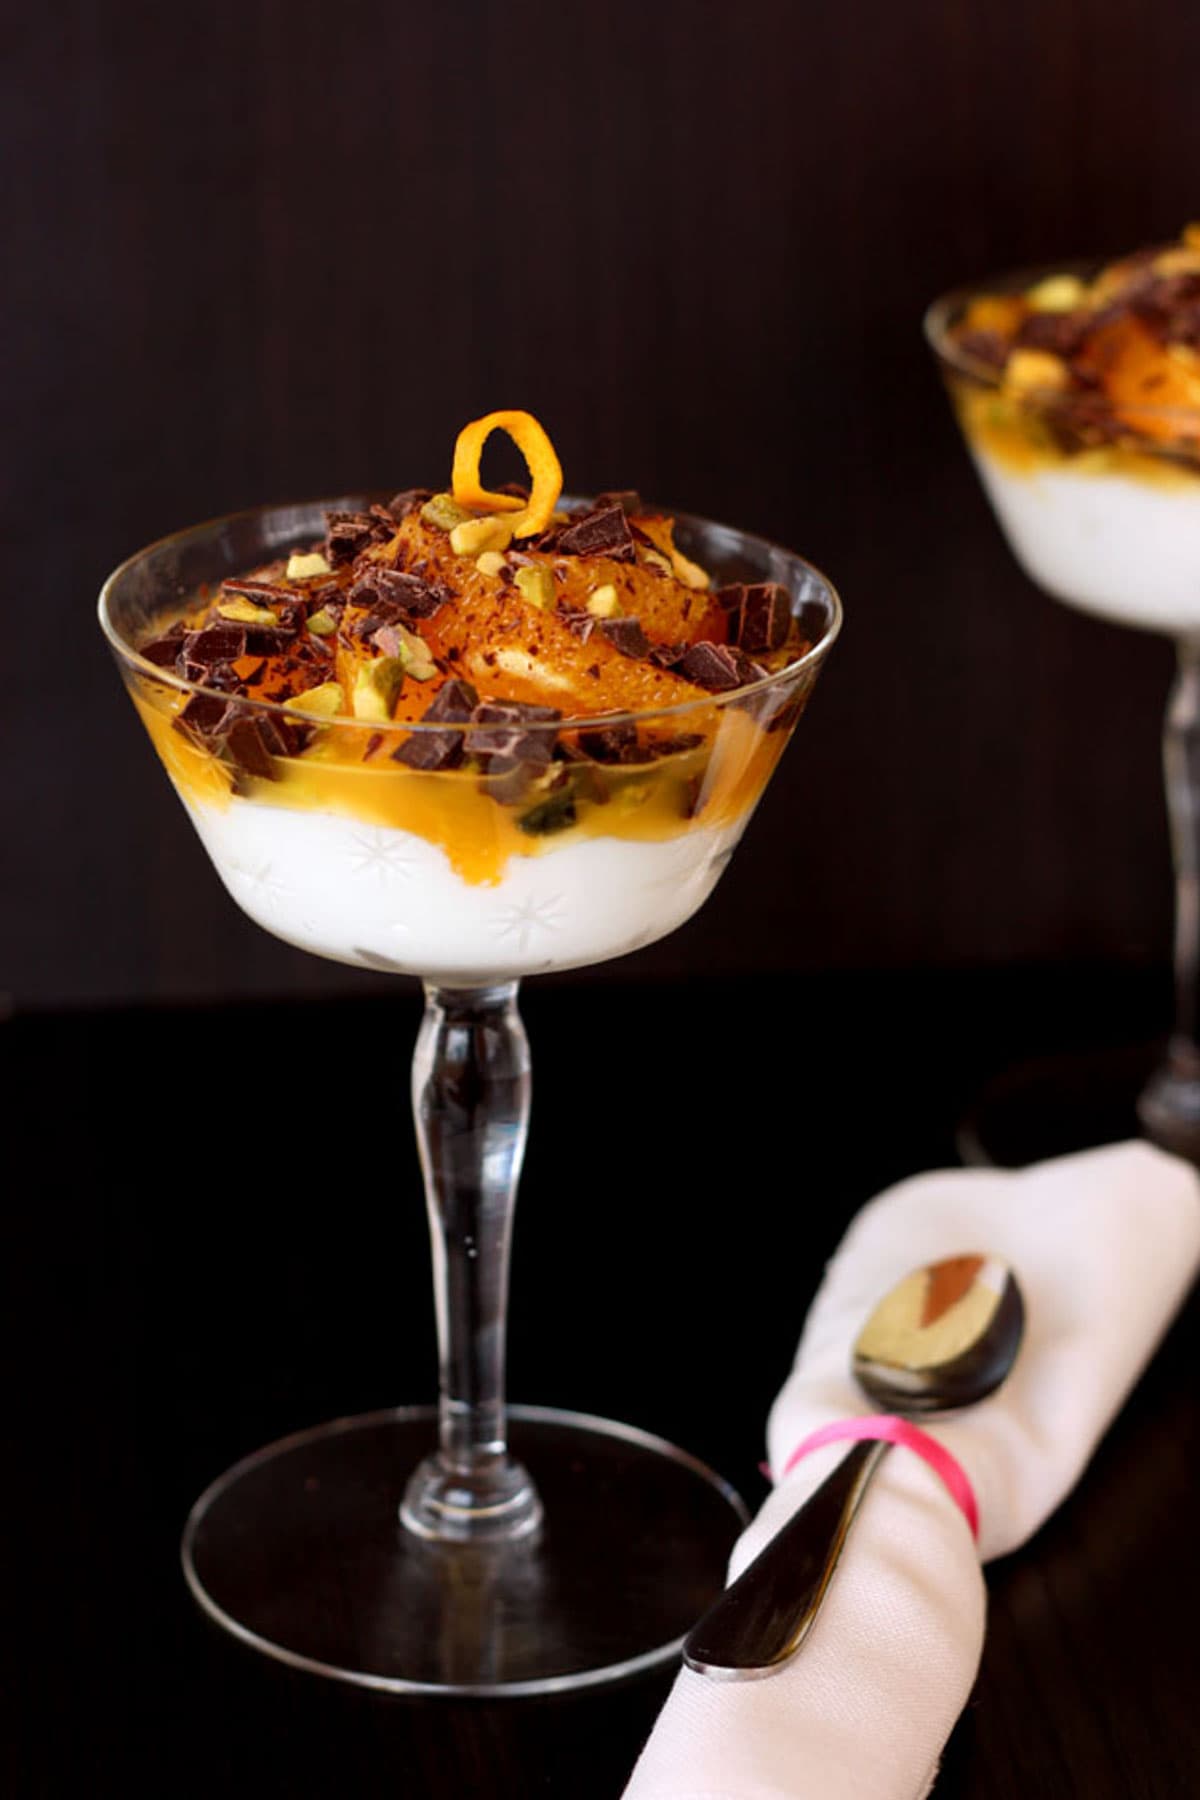 A stemmed dessert glass filled with yogurt, orange slices, dark chocolate chunks, and pistachios with a rolled cloth napkin and spoon next to it.